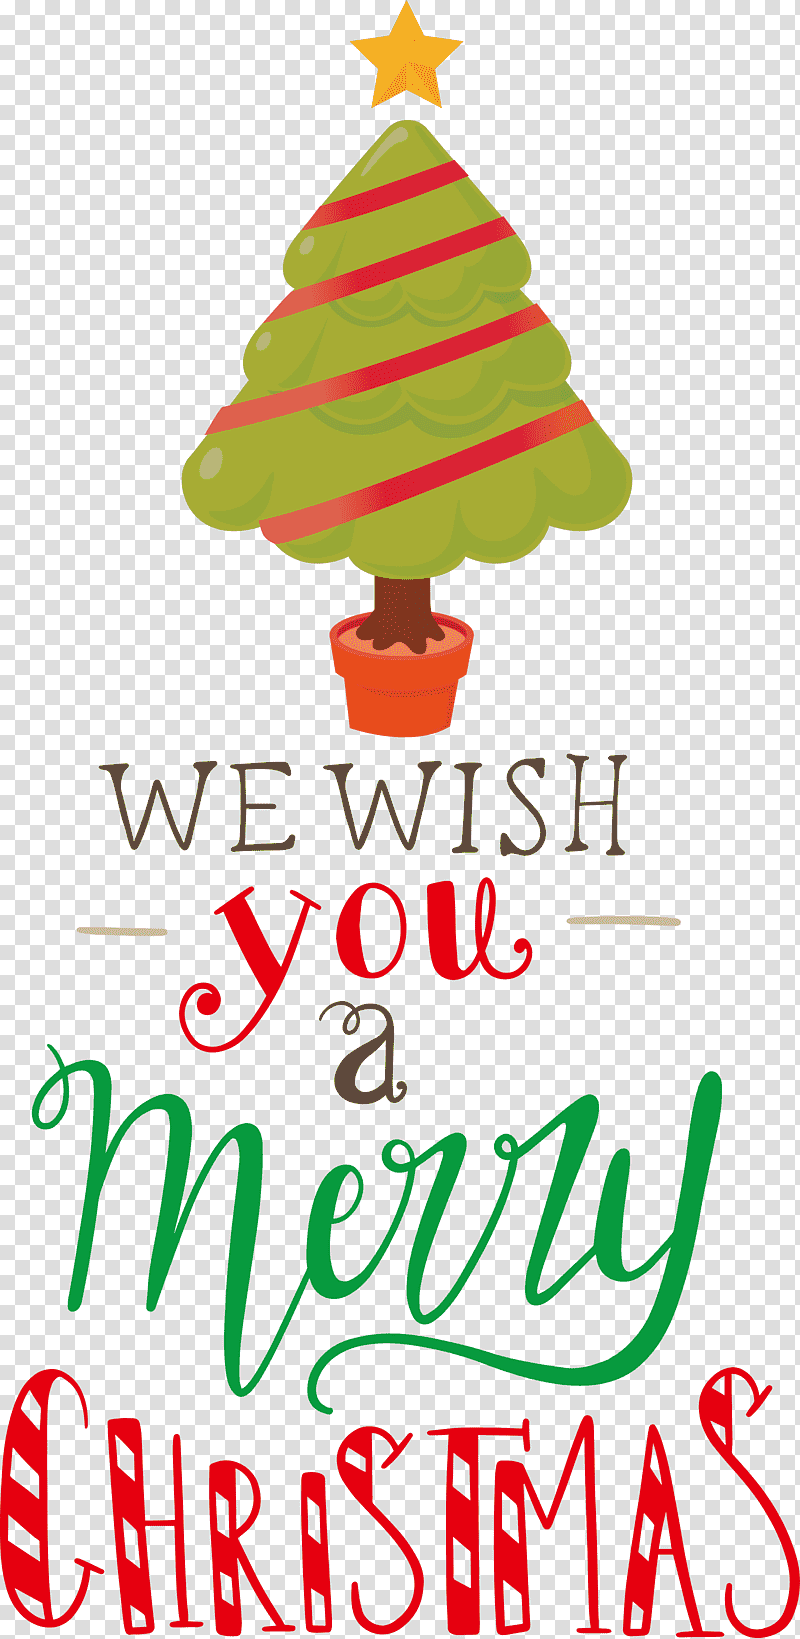 Merry Christmas We Wish You A Merry Christmas, Christmas Tree, Christmas Day, Holiday Ornament, Christmas Ornament, Christmas Ornament M, Line transparent background PNG clipart